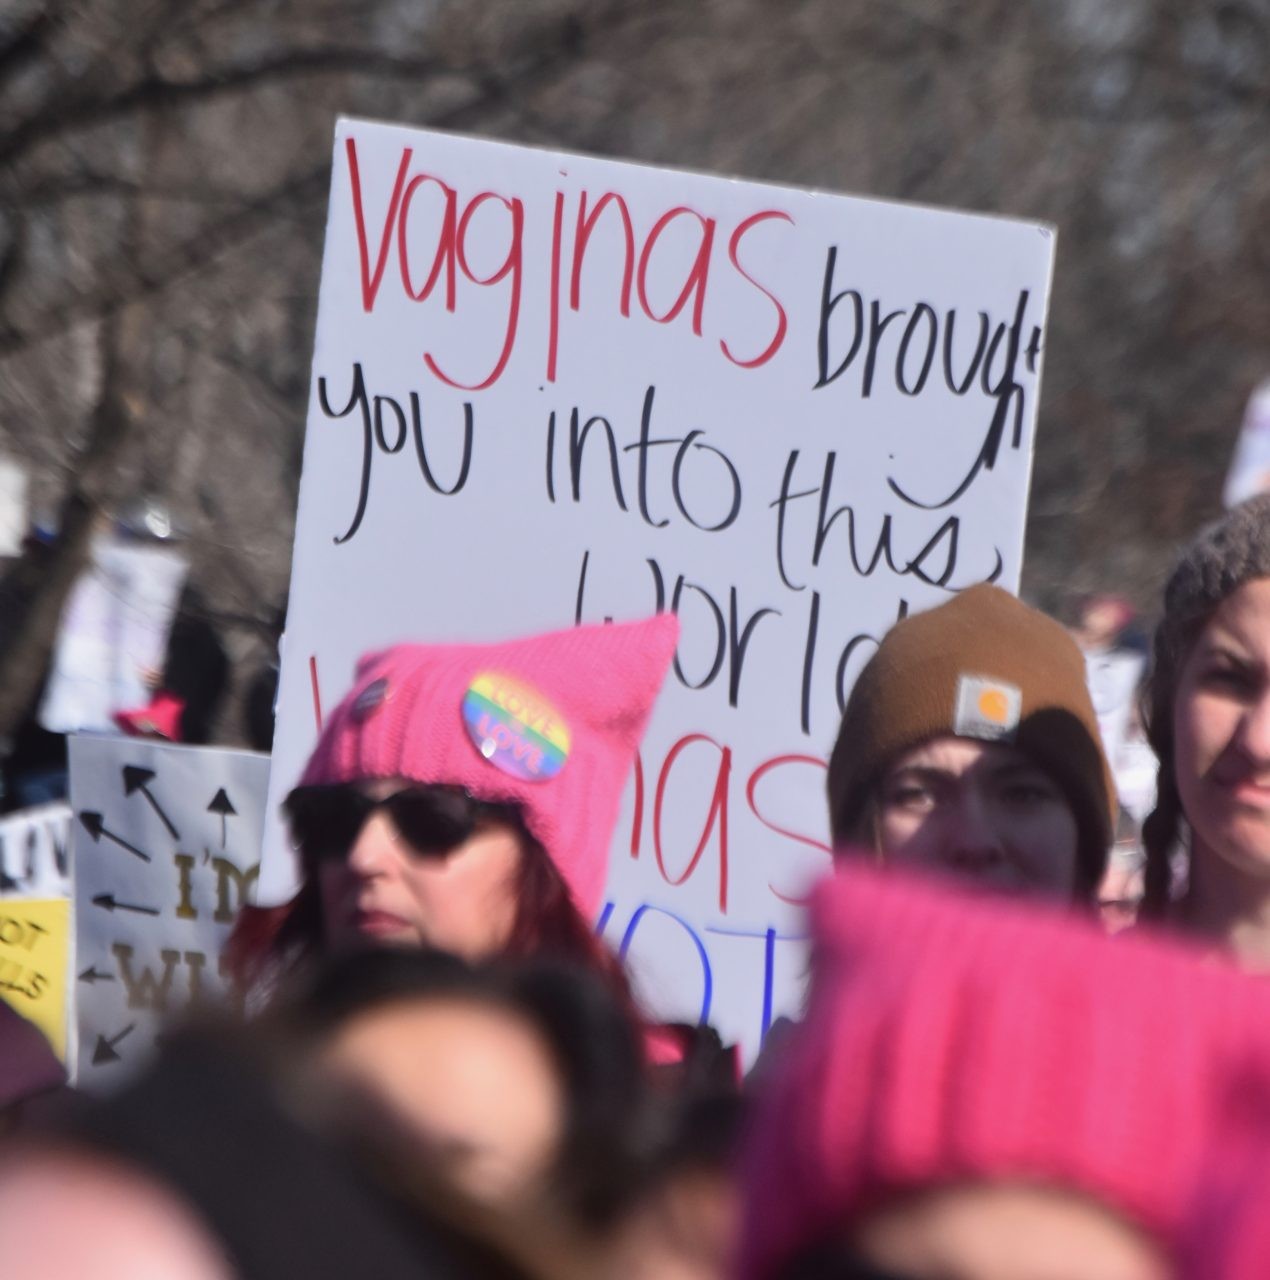 PHOTOS: Top 21 Signs From the Angry Women’s March in D.C.1270 x 1280